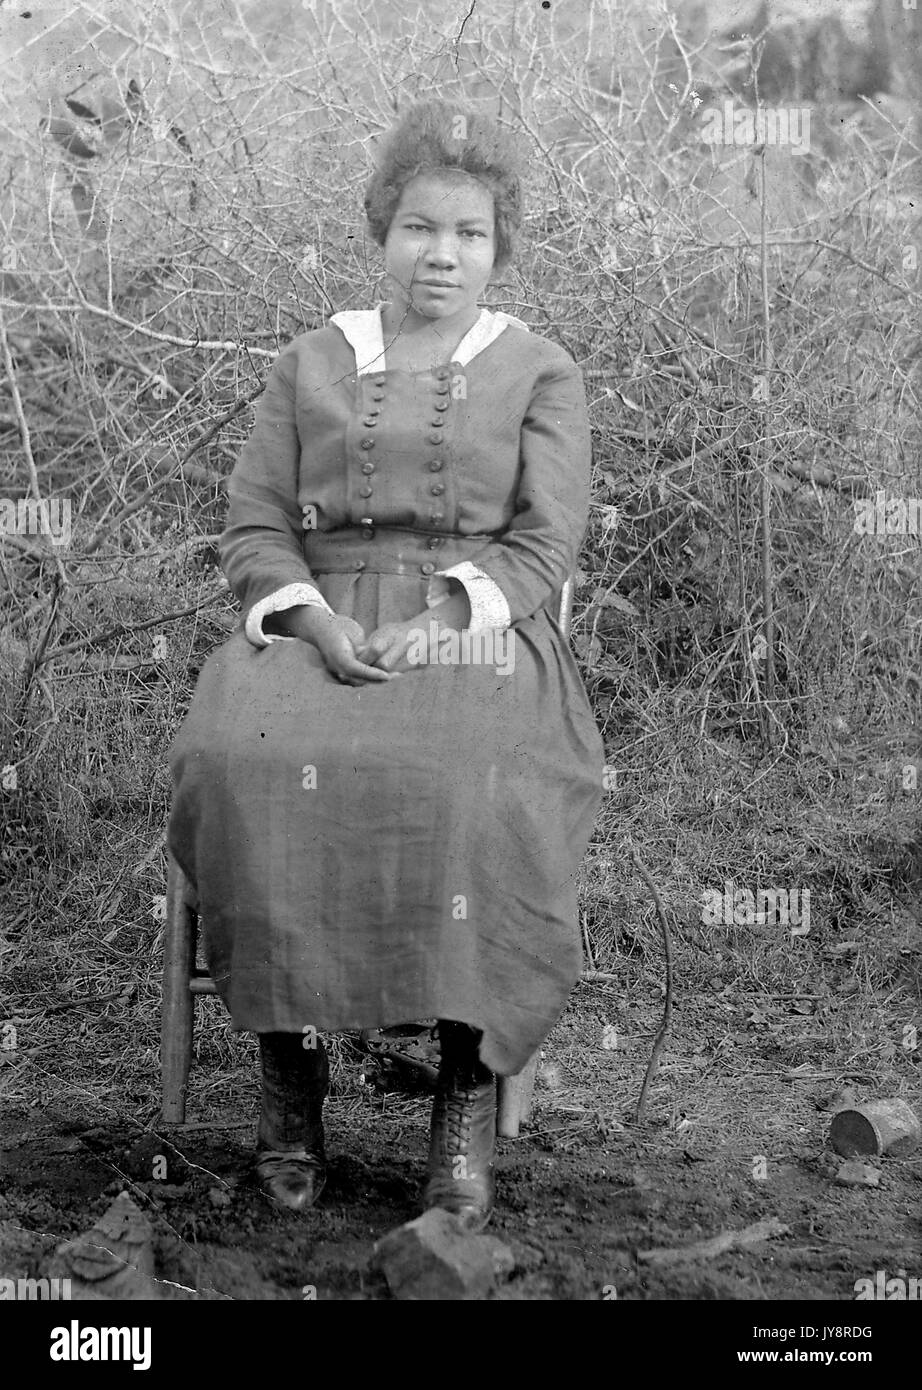 Full length seated portrait of young African American woman, wearing a dress, lace up boots, and a neutral expression, sitting outside in front of plants, 1915. Stock Photo